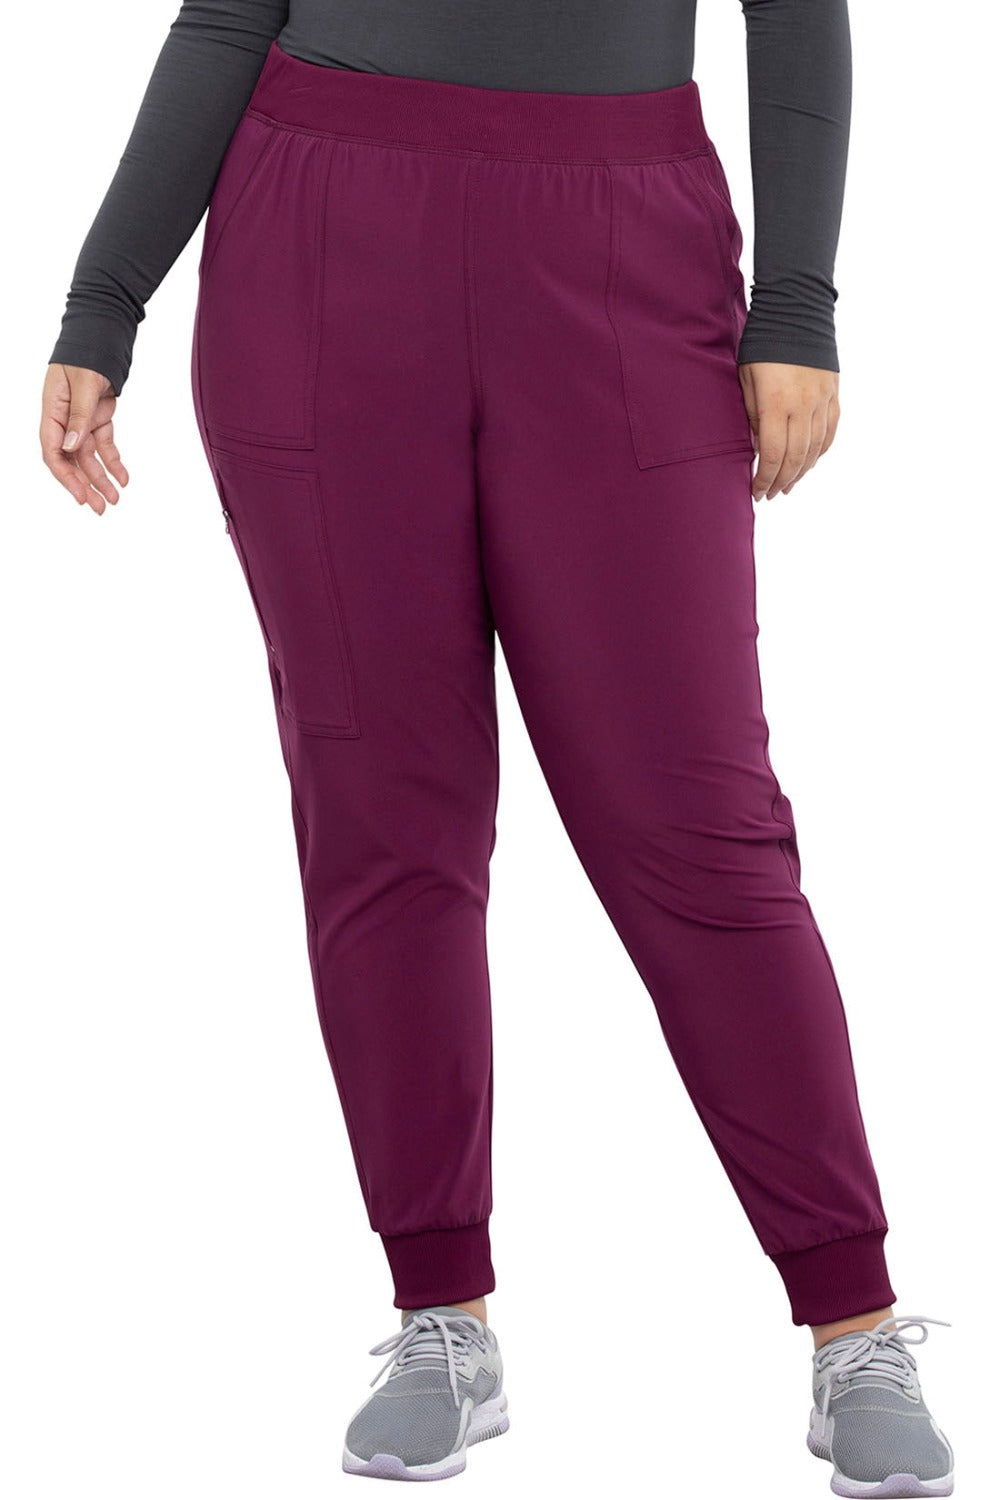 Cherokee Allura Scrub Pant Pull On Jogger in Wine at Parker's Clothing and Shoes.